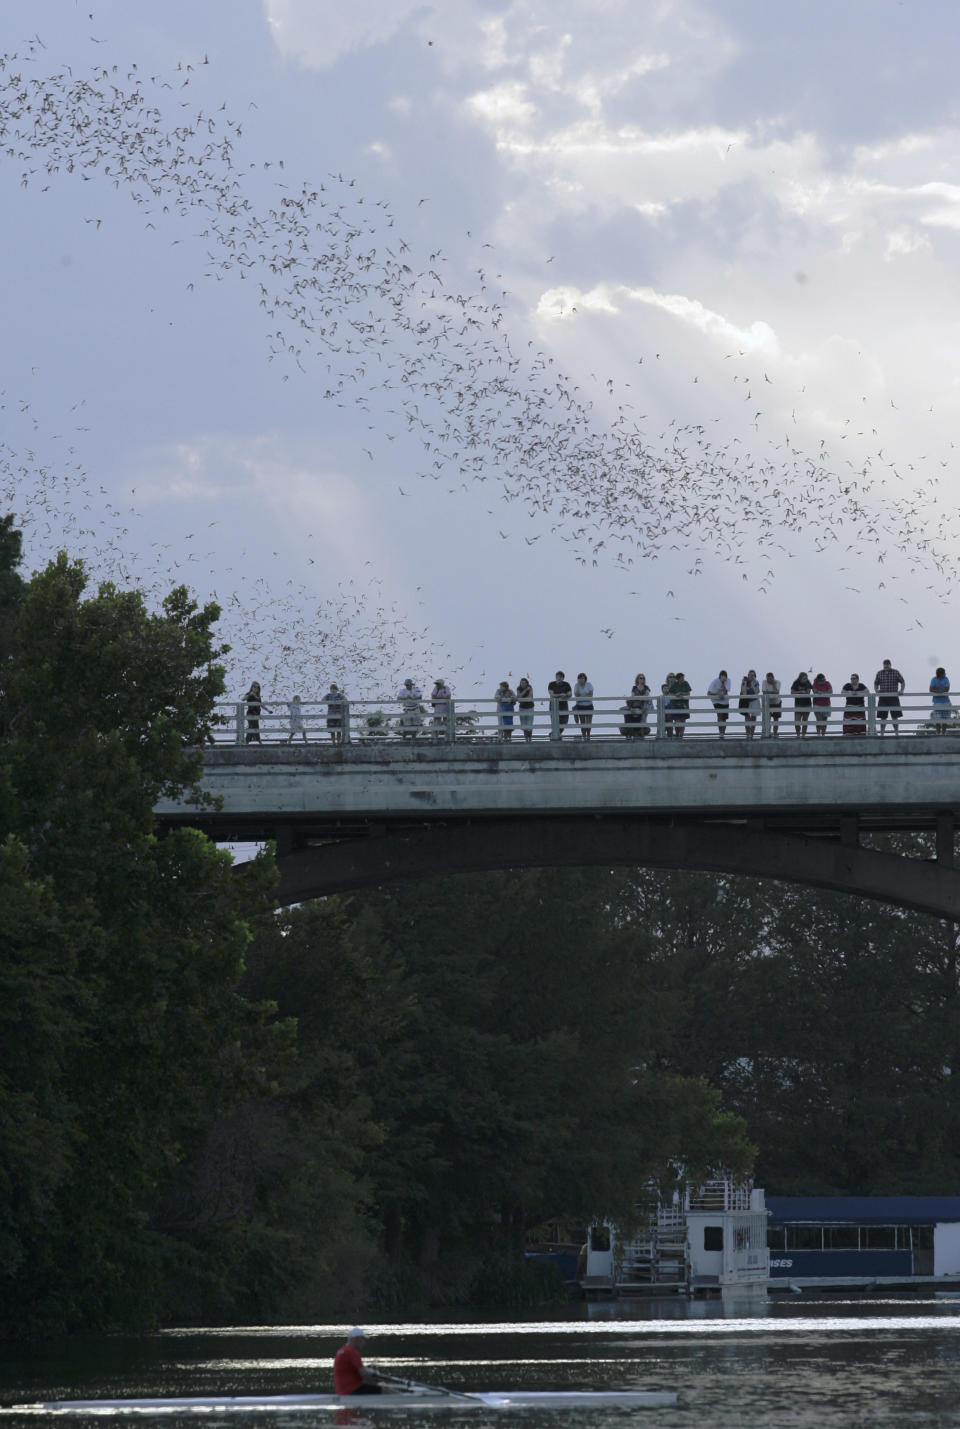 FILE - This file photo taken Aug. 11, 2009 shows an oarsman and sight-seeing boat floating the impounded Colorado River as some of the more than 1.5 million bats emerge from the Congress Ave. bridge in Austin, Texas. (AP Photo/Harry Cabluck, File)